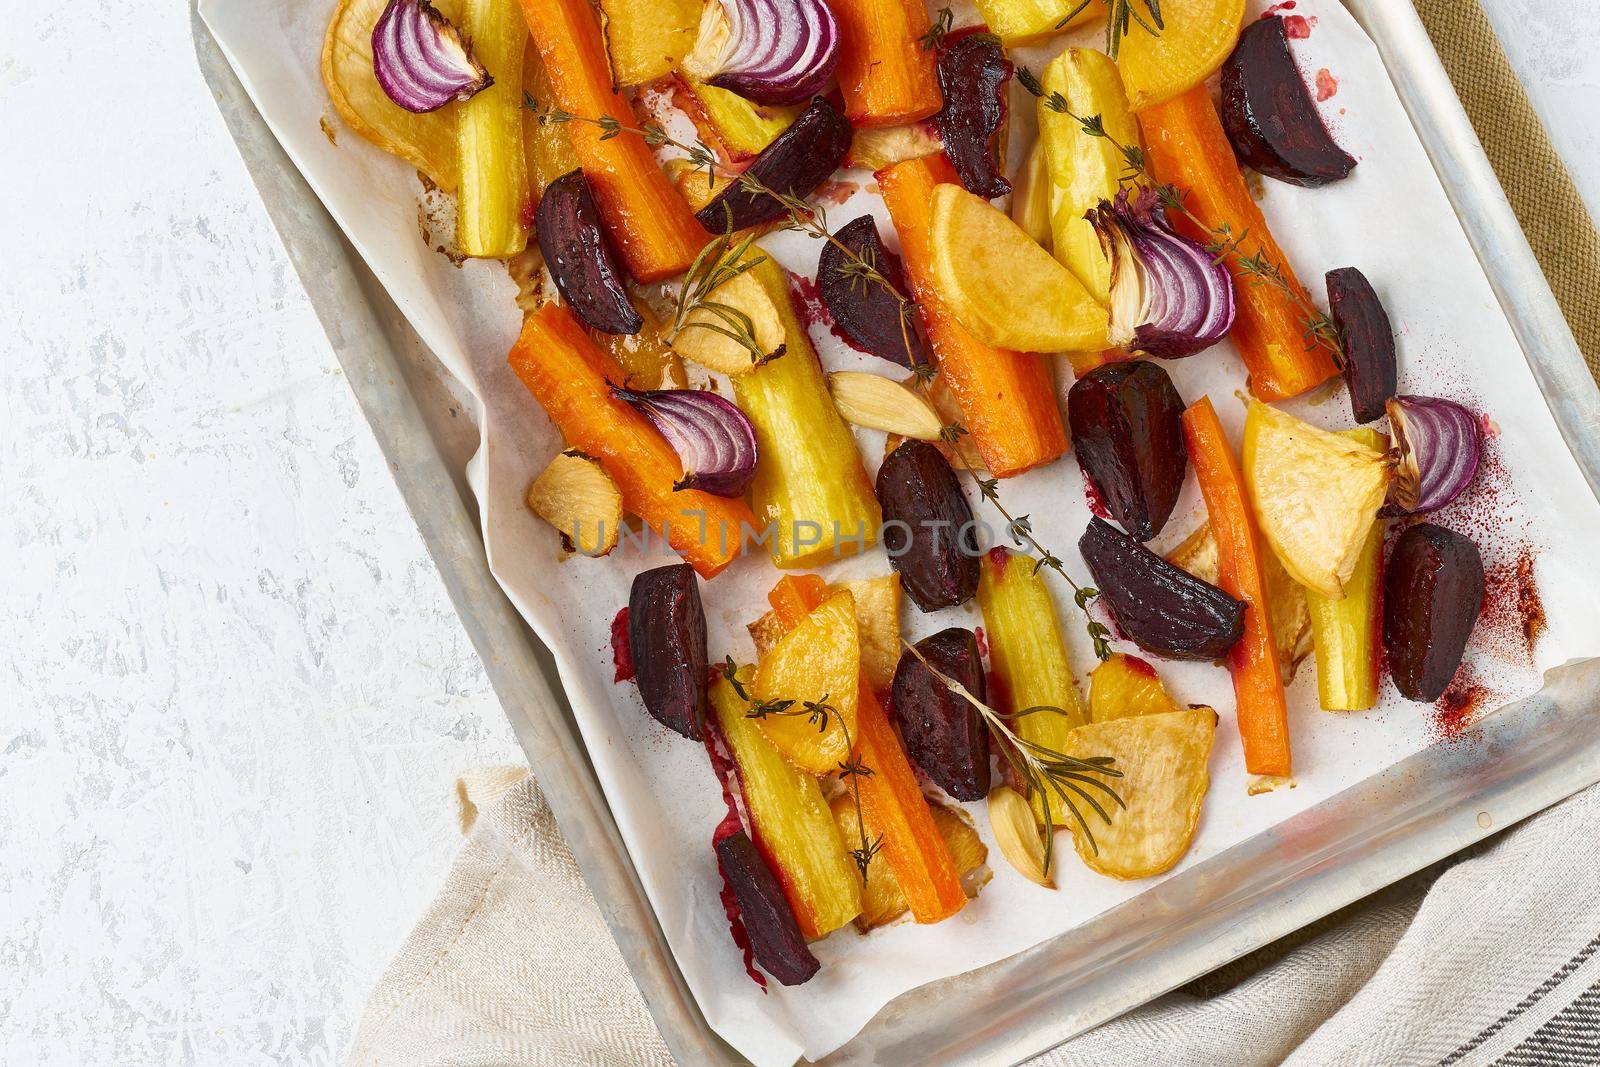 Colorful roasted vegetables on tray with parchment. Mix of carrots, beets, turnips, rutabaga, onions. Vegetarianism, veganism, proper nutrition, lchf. Top view, copy space